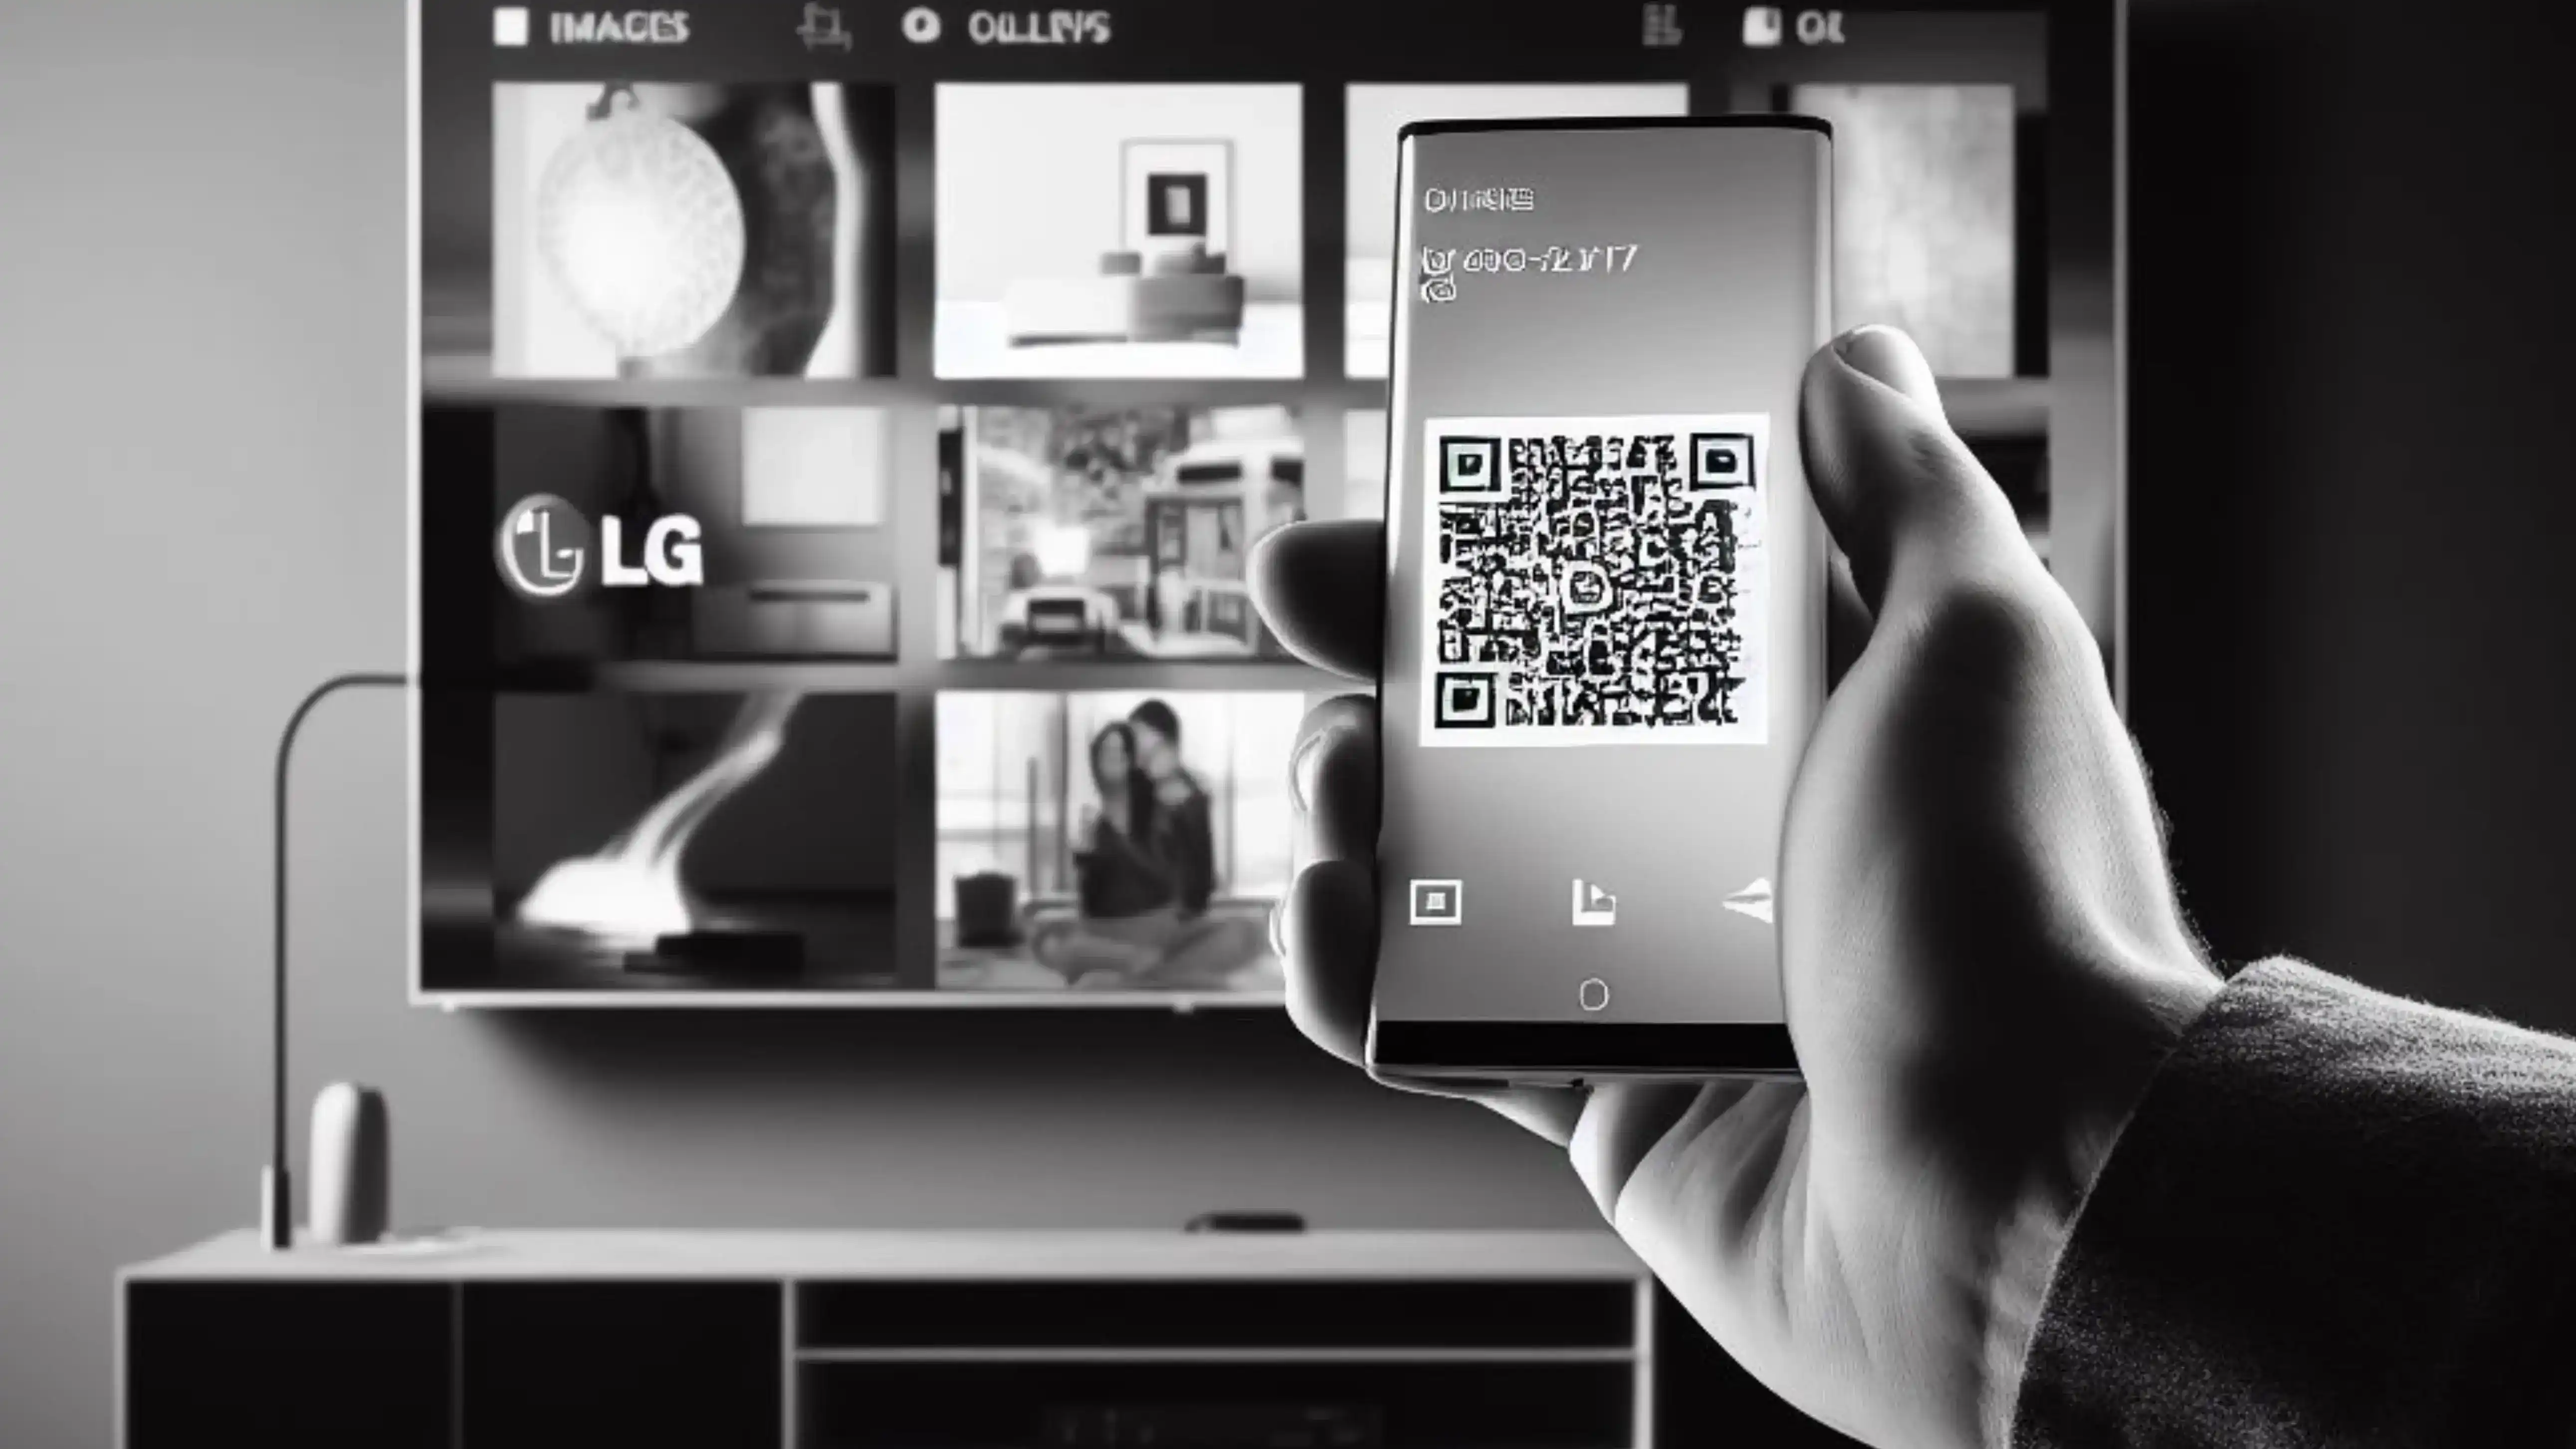 How To Find Qr Code On Lg TV